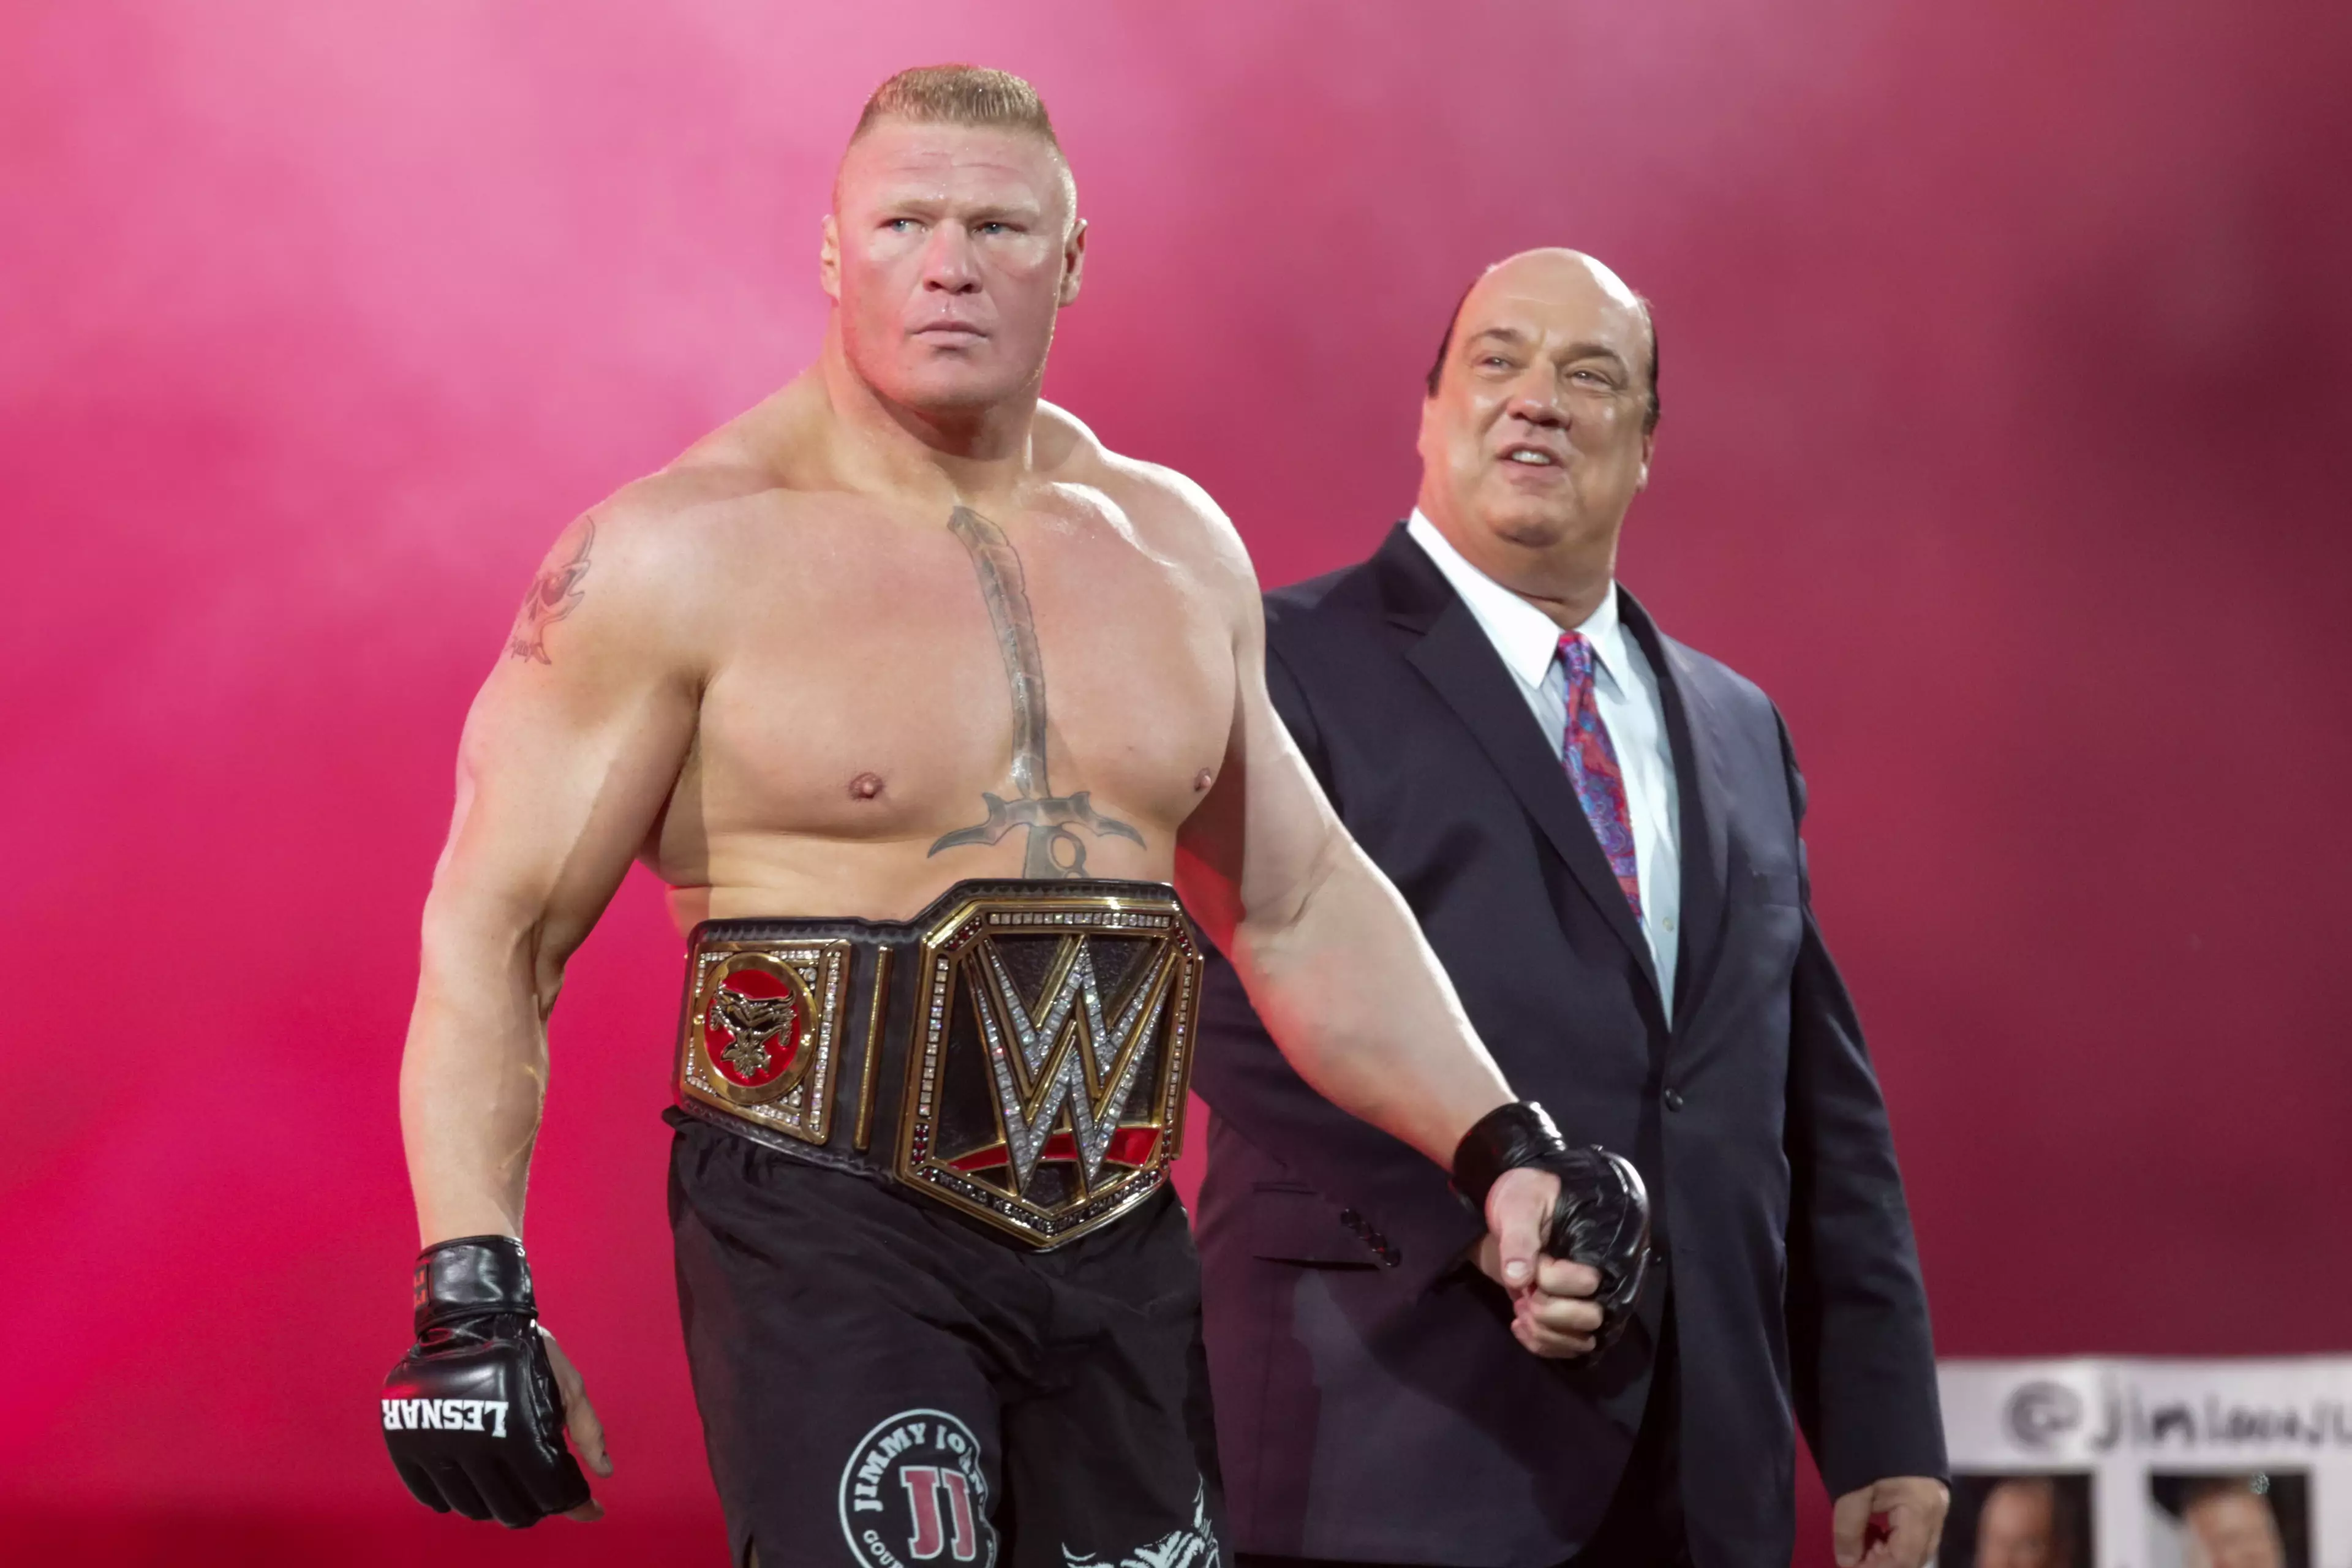 Paul Heyman Offers His Thoughts On Conor McGregor Joining WWE